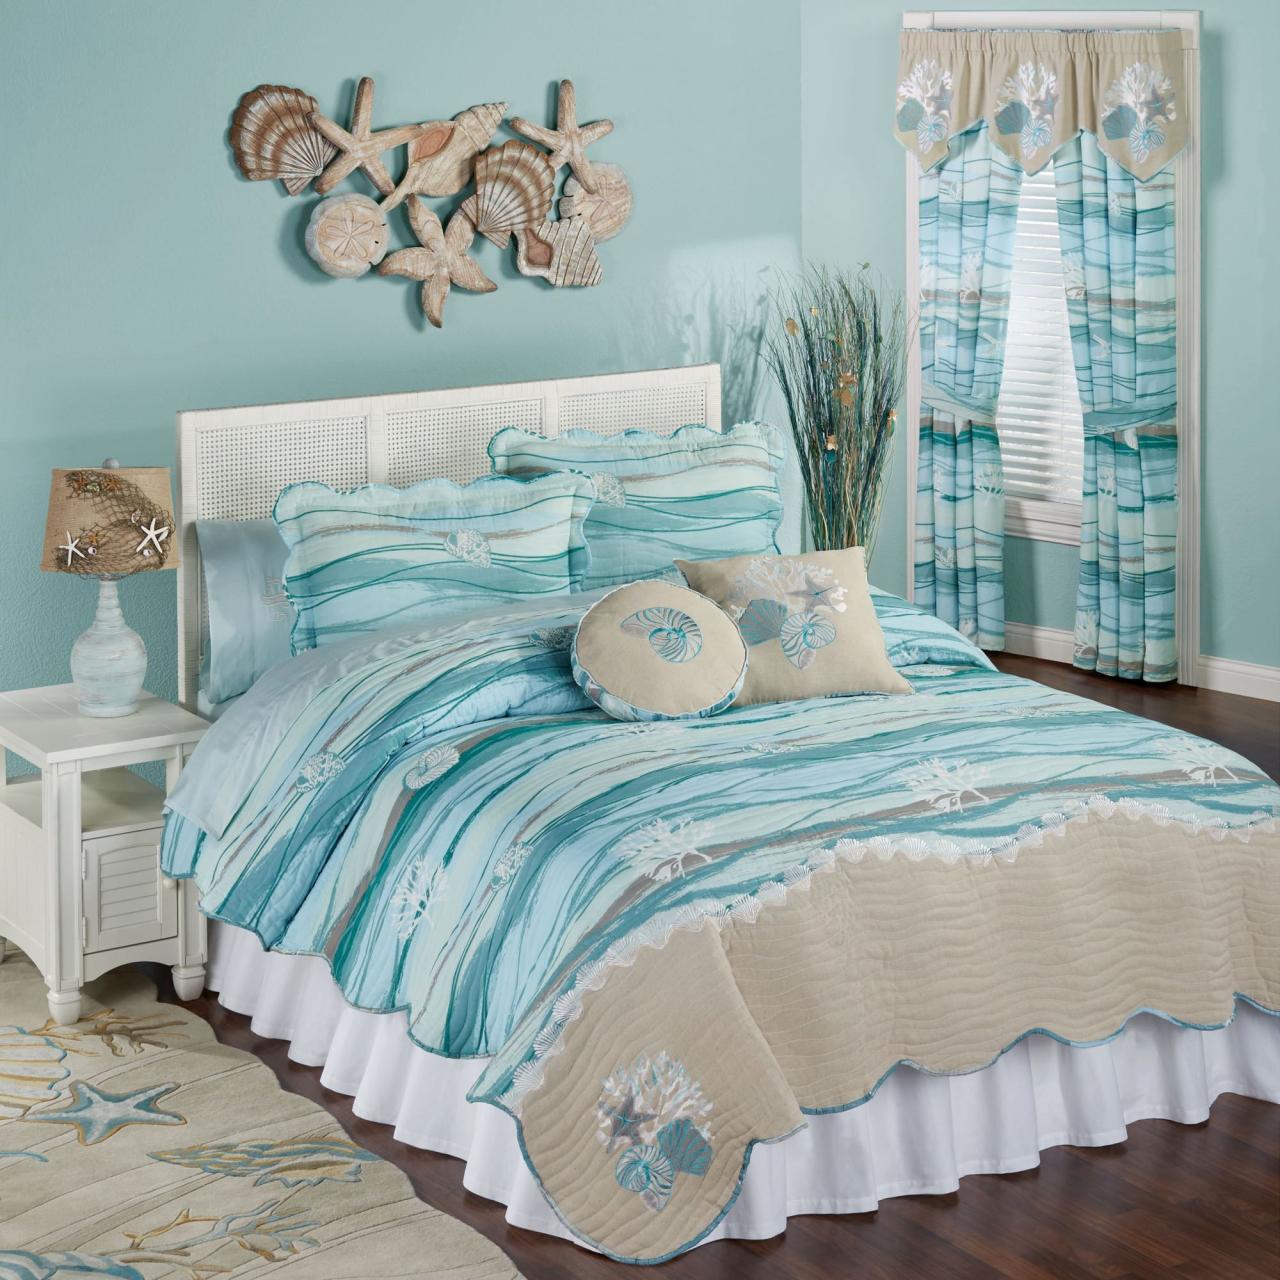 Coastal-Inspired Bedroom Décor for a Relaxing Feel